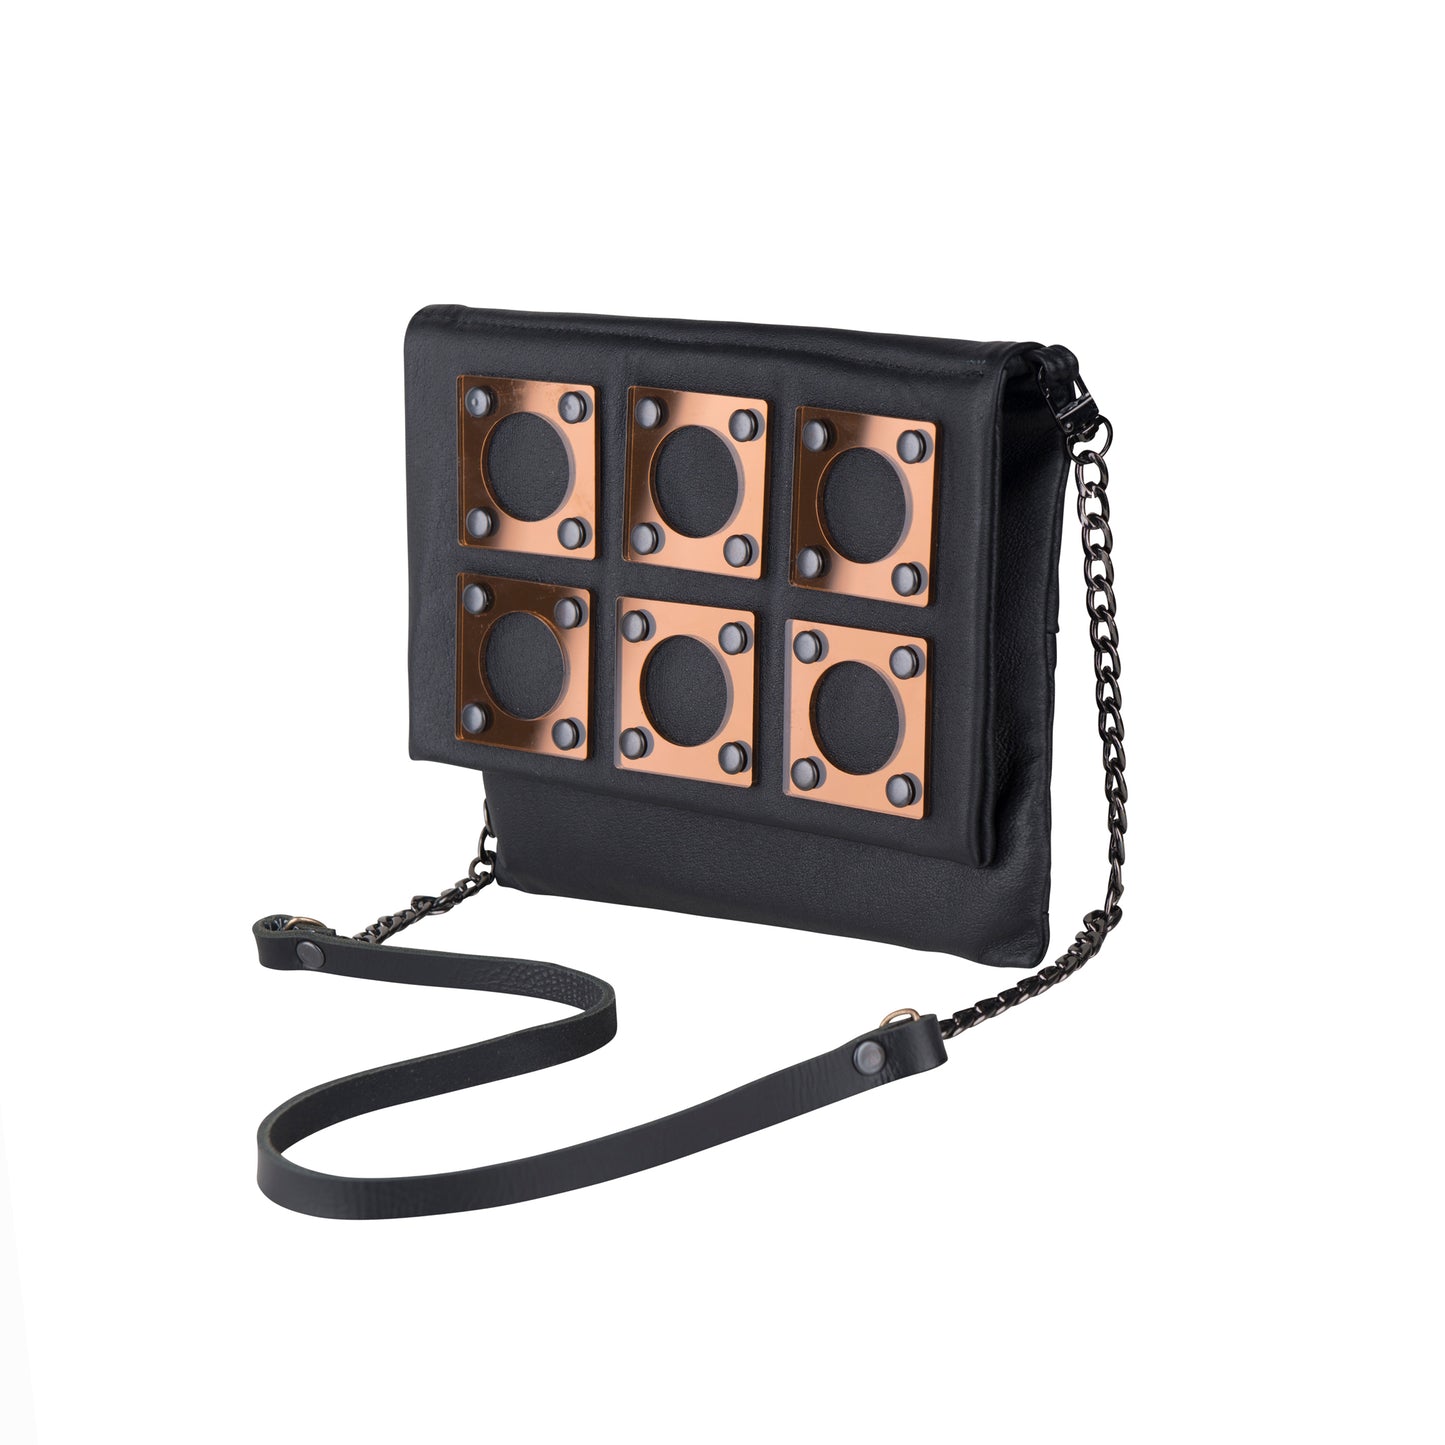 METANoIA black recycled leather small handbag with square and hollowed circle bronze acrylic forms fashioned into a repeative fashion in side angle view.